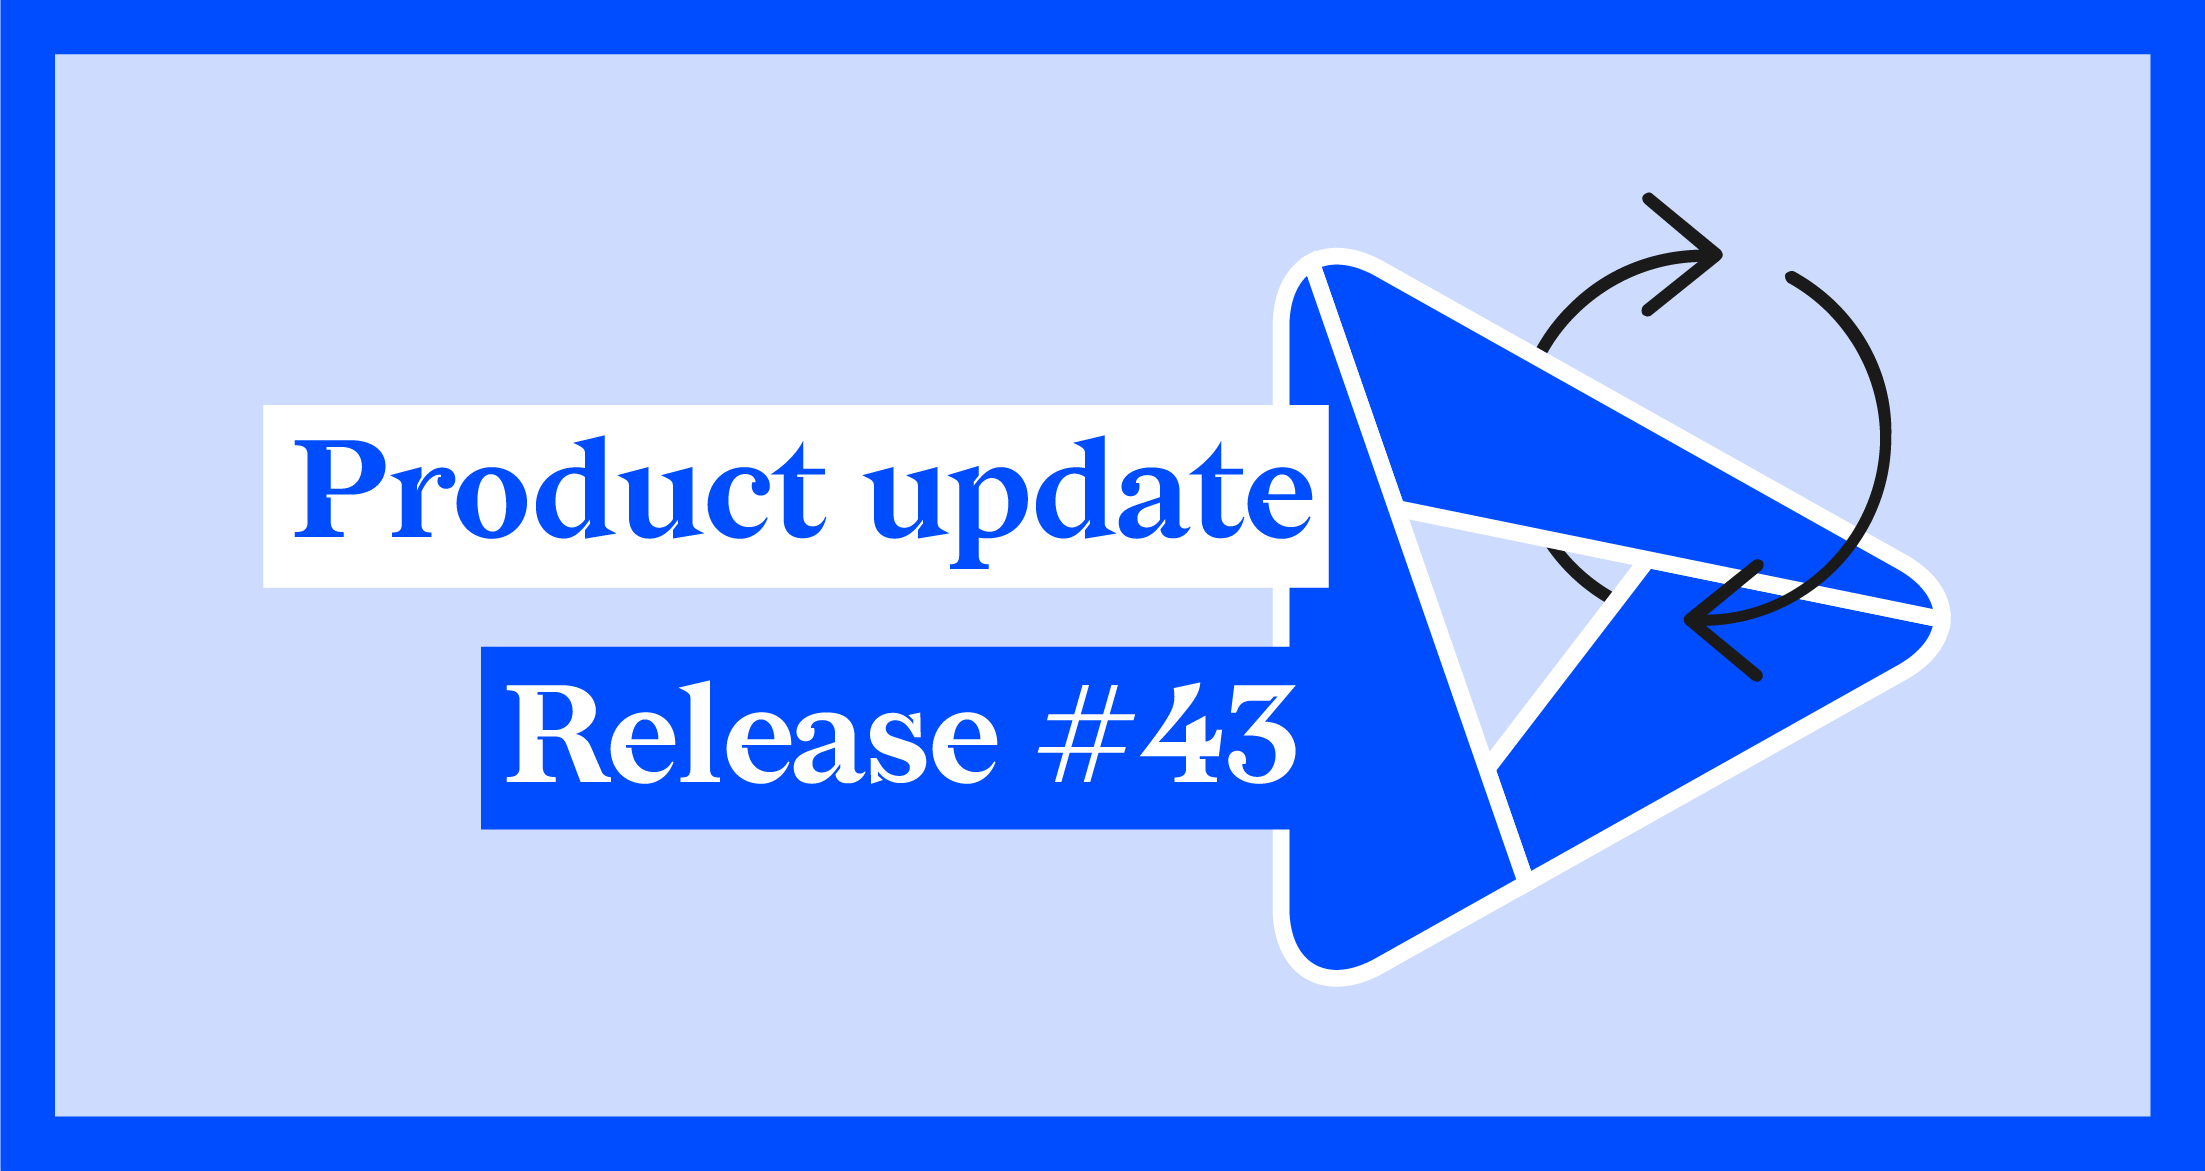 Datylon Product Update R43 - What's new?